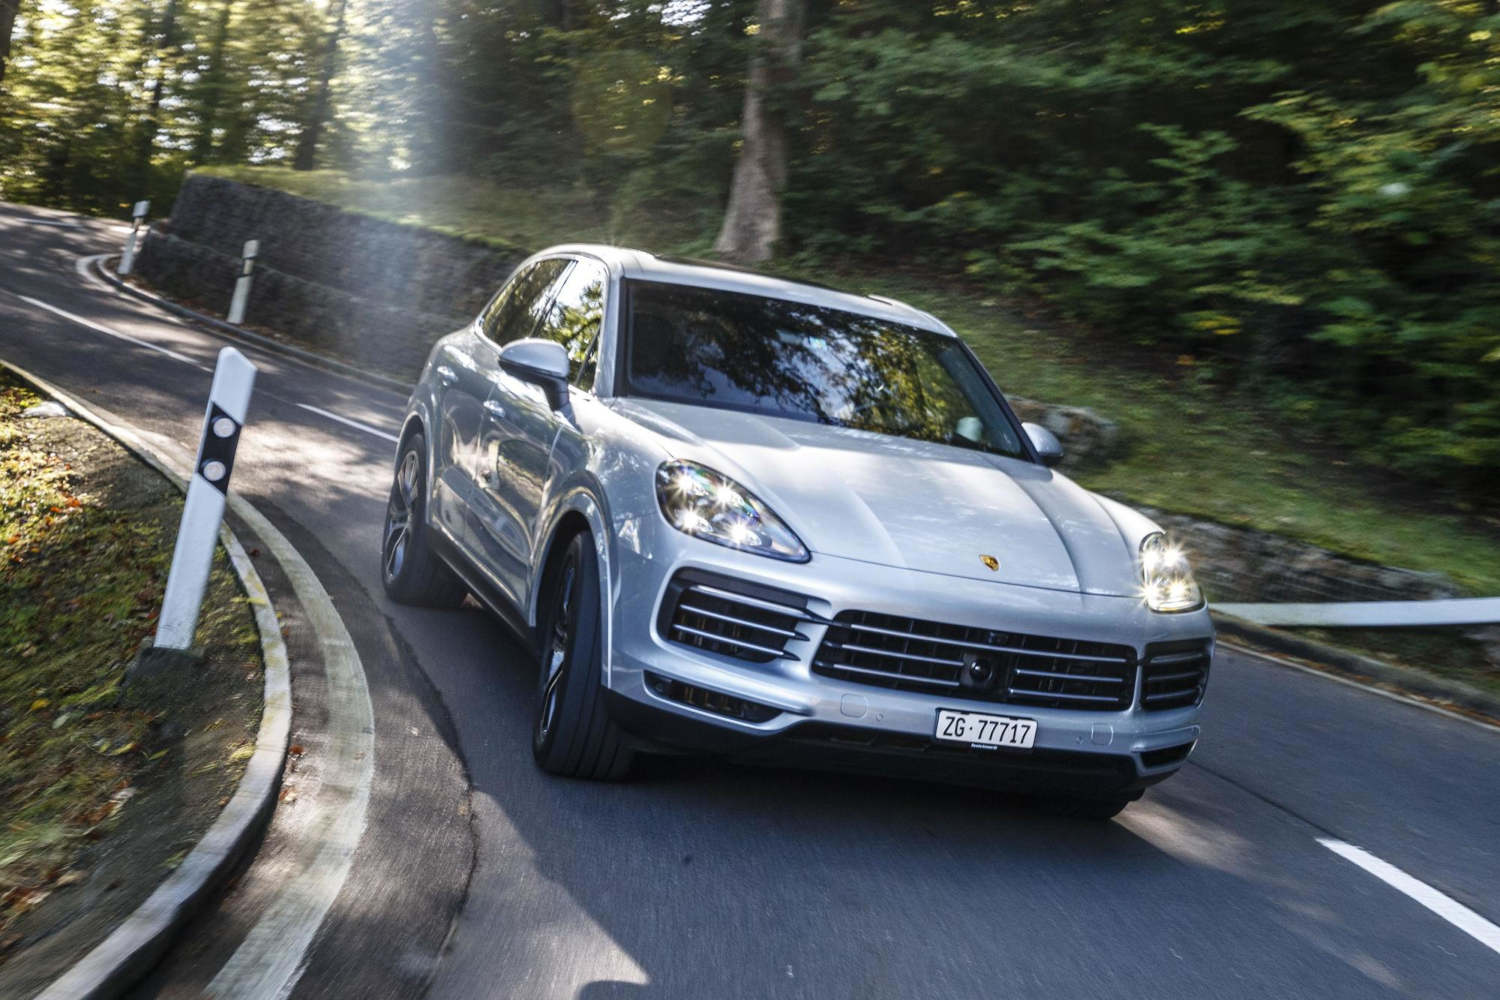 One of the best used luxury SUVs comes from Porsche